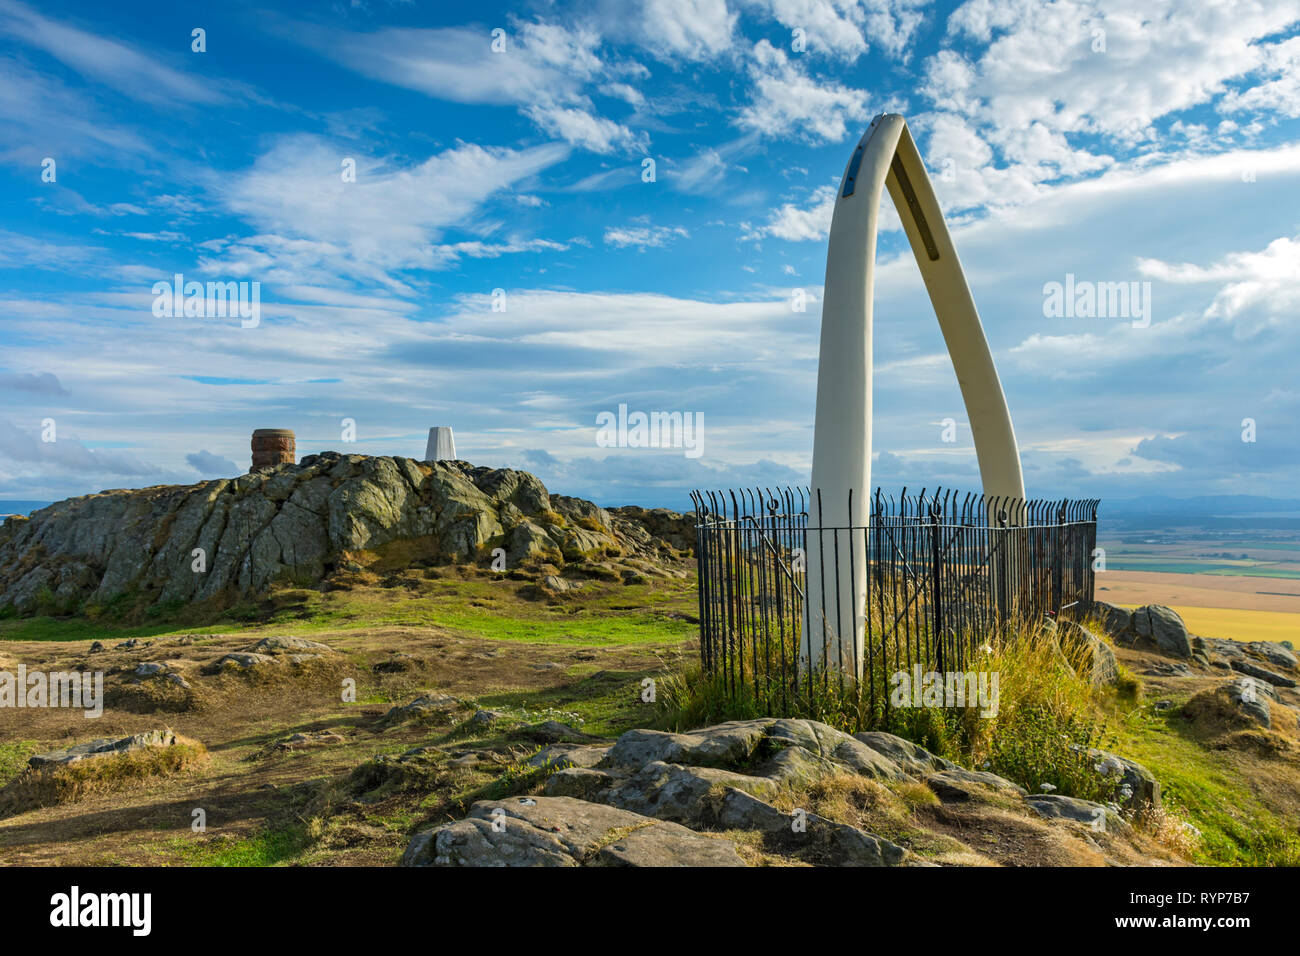 The  toposcope (viewpoint indicator), trig point and replica whale bones on the summit of North Berwick Law, East Lothian, Scotland, UK Stock Photo